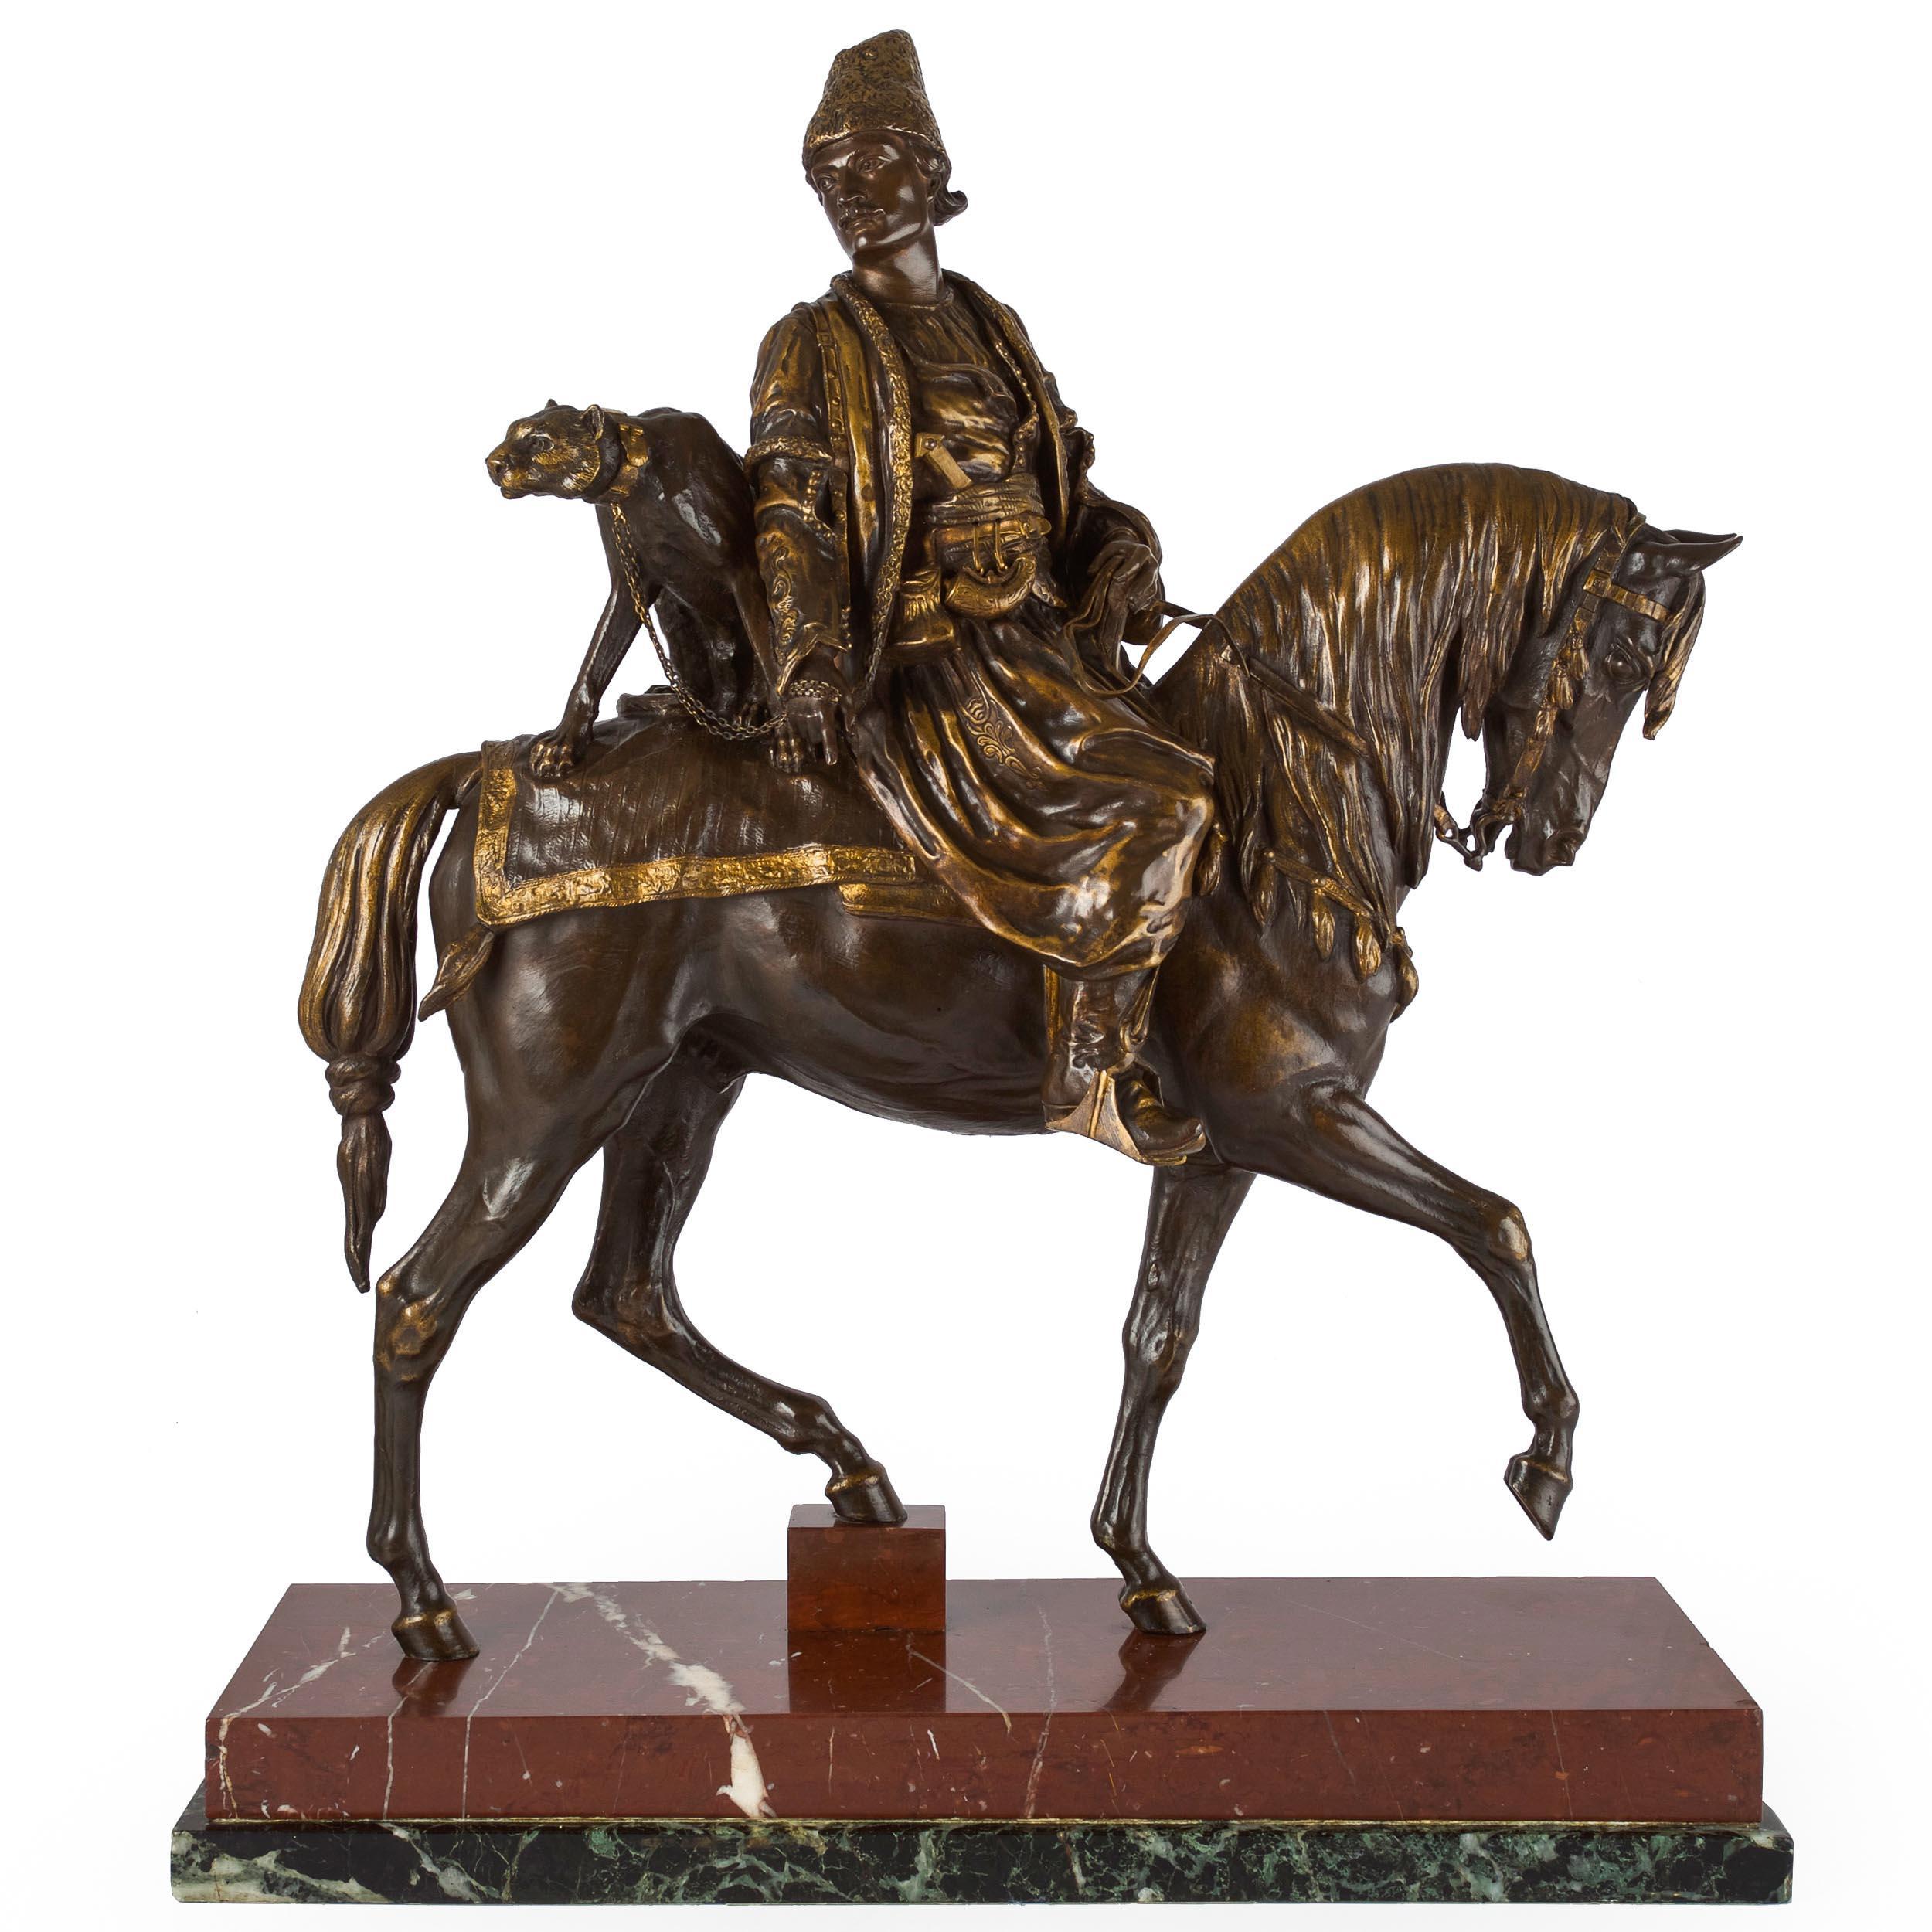 A very fine and quite rare model of Un Chasseur Persan au Guépard, conceived in 1878 and exhibited at the Paris Salon in 1879; it was for this group that Dubucand was awarded the rare honor of a Gold Medal. It is a very infrequent find on the open